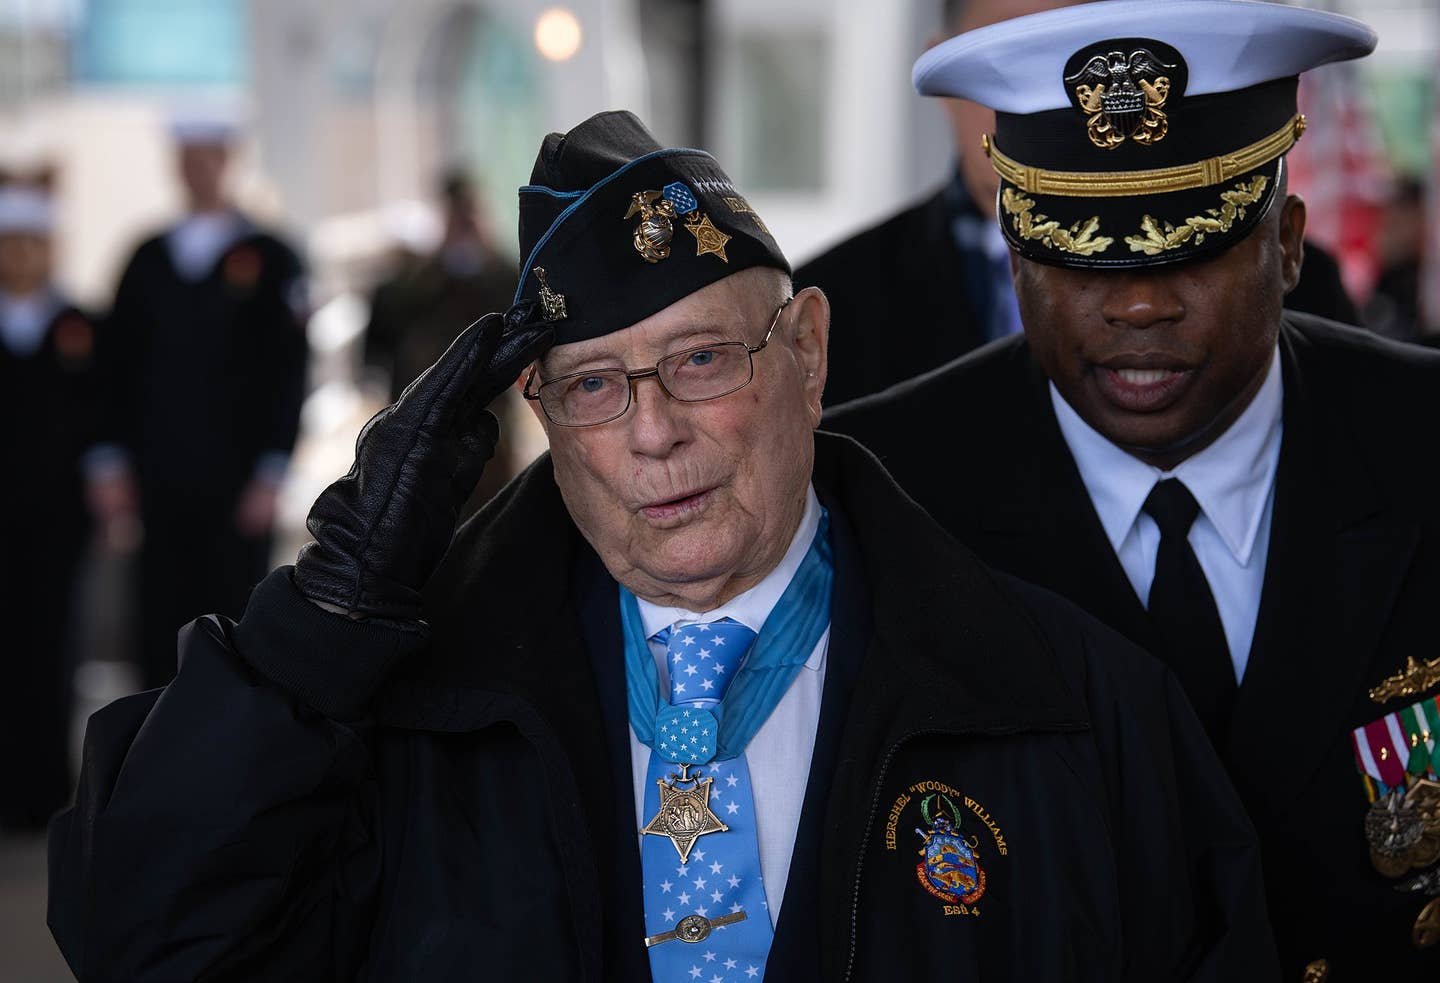 Hershel Woodrow Williams, Retired Chief Warrant Officer Four and Medal of Honor recipient, salutes as he is introduced to the stage along with other members of the ship commissioning committee, March 7, 2020 in Norfolk, VA...The ship commissioning ceremony continues a tradition three centuries old, observed by navies around the world and by our own Navy since December 1775, when “Alfred”, the first ship of the Continental Navy, was commissioned at Philadelphia. (U.S. Marine Corps Photo by Lance Cpl. Fernando Moreno)